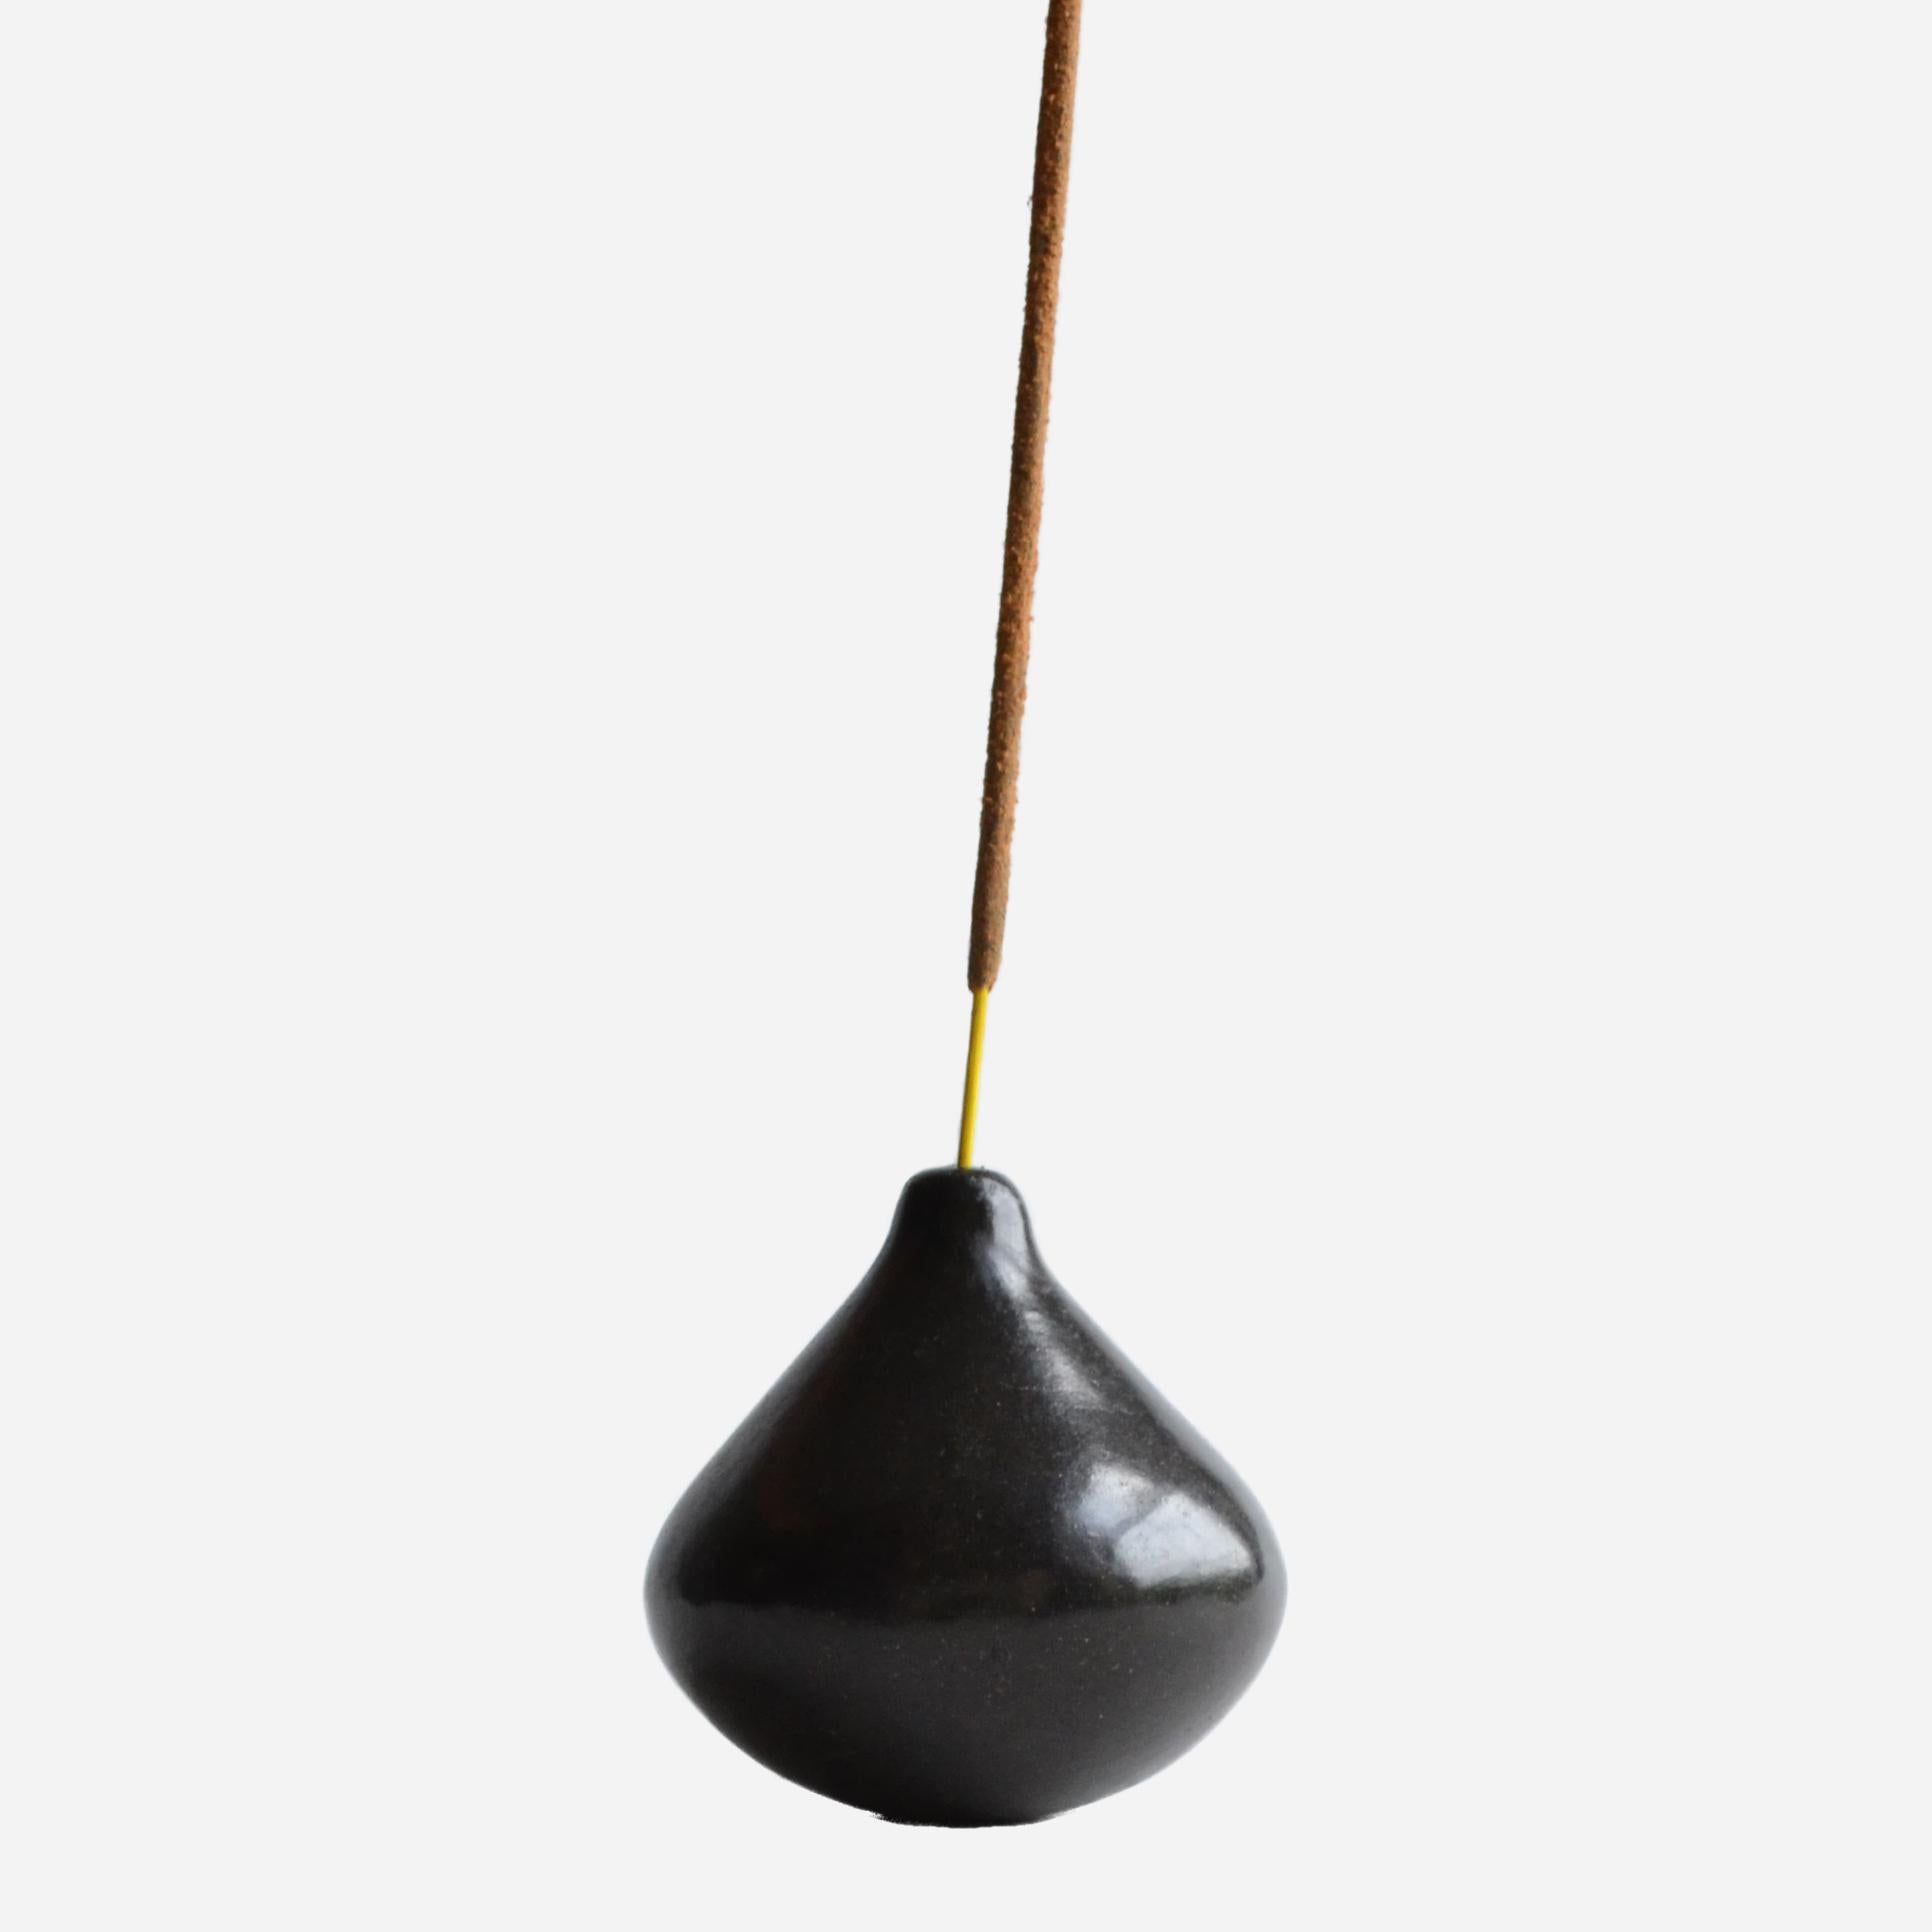 The Pera sculpture explores the beauty of the material and artisanal work to perfume the air in a subtle shape that enhances the delicate incense stick shape.

The texture, colour and shine is remarked in a small piece with organic shape, easy and